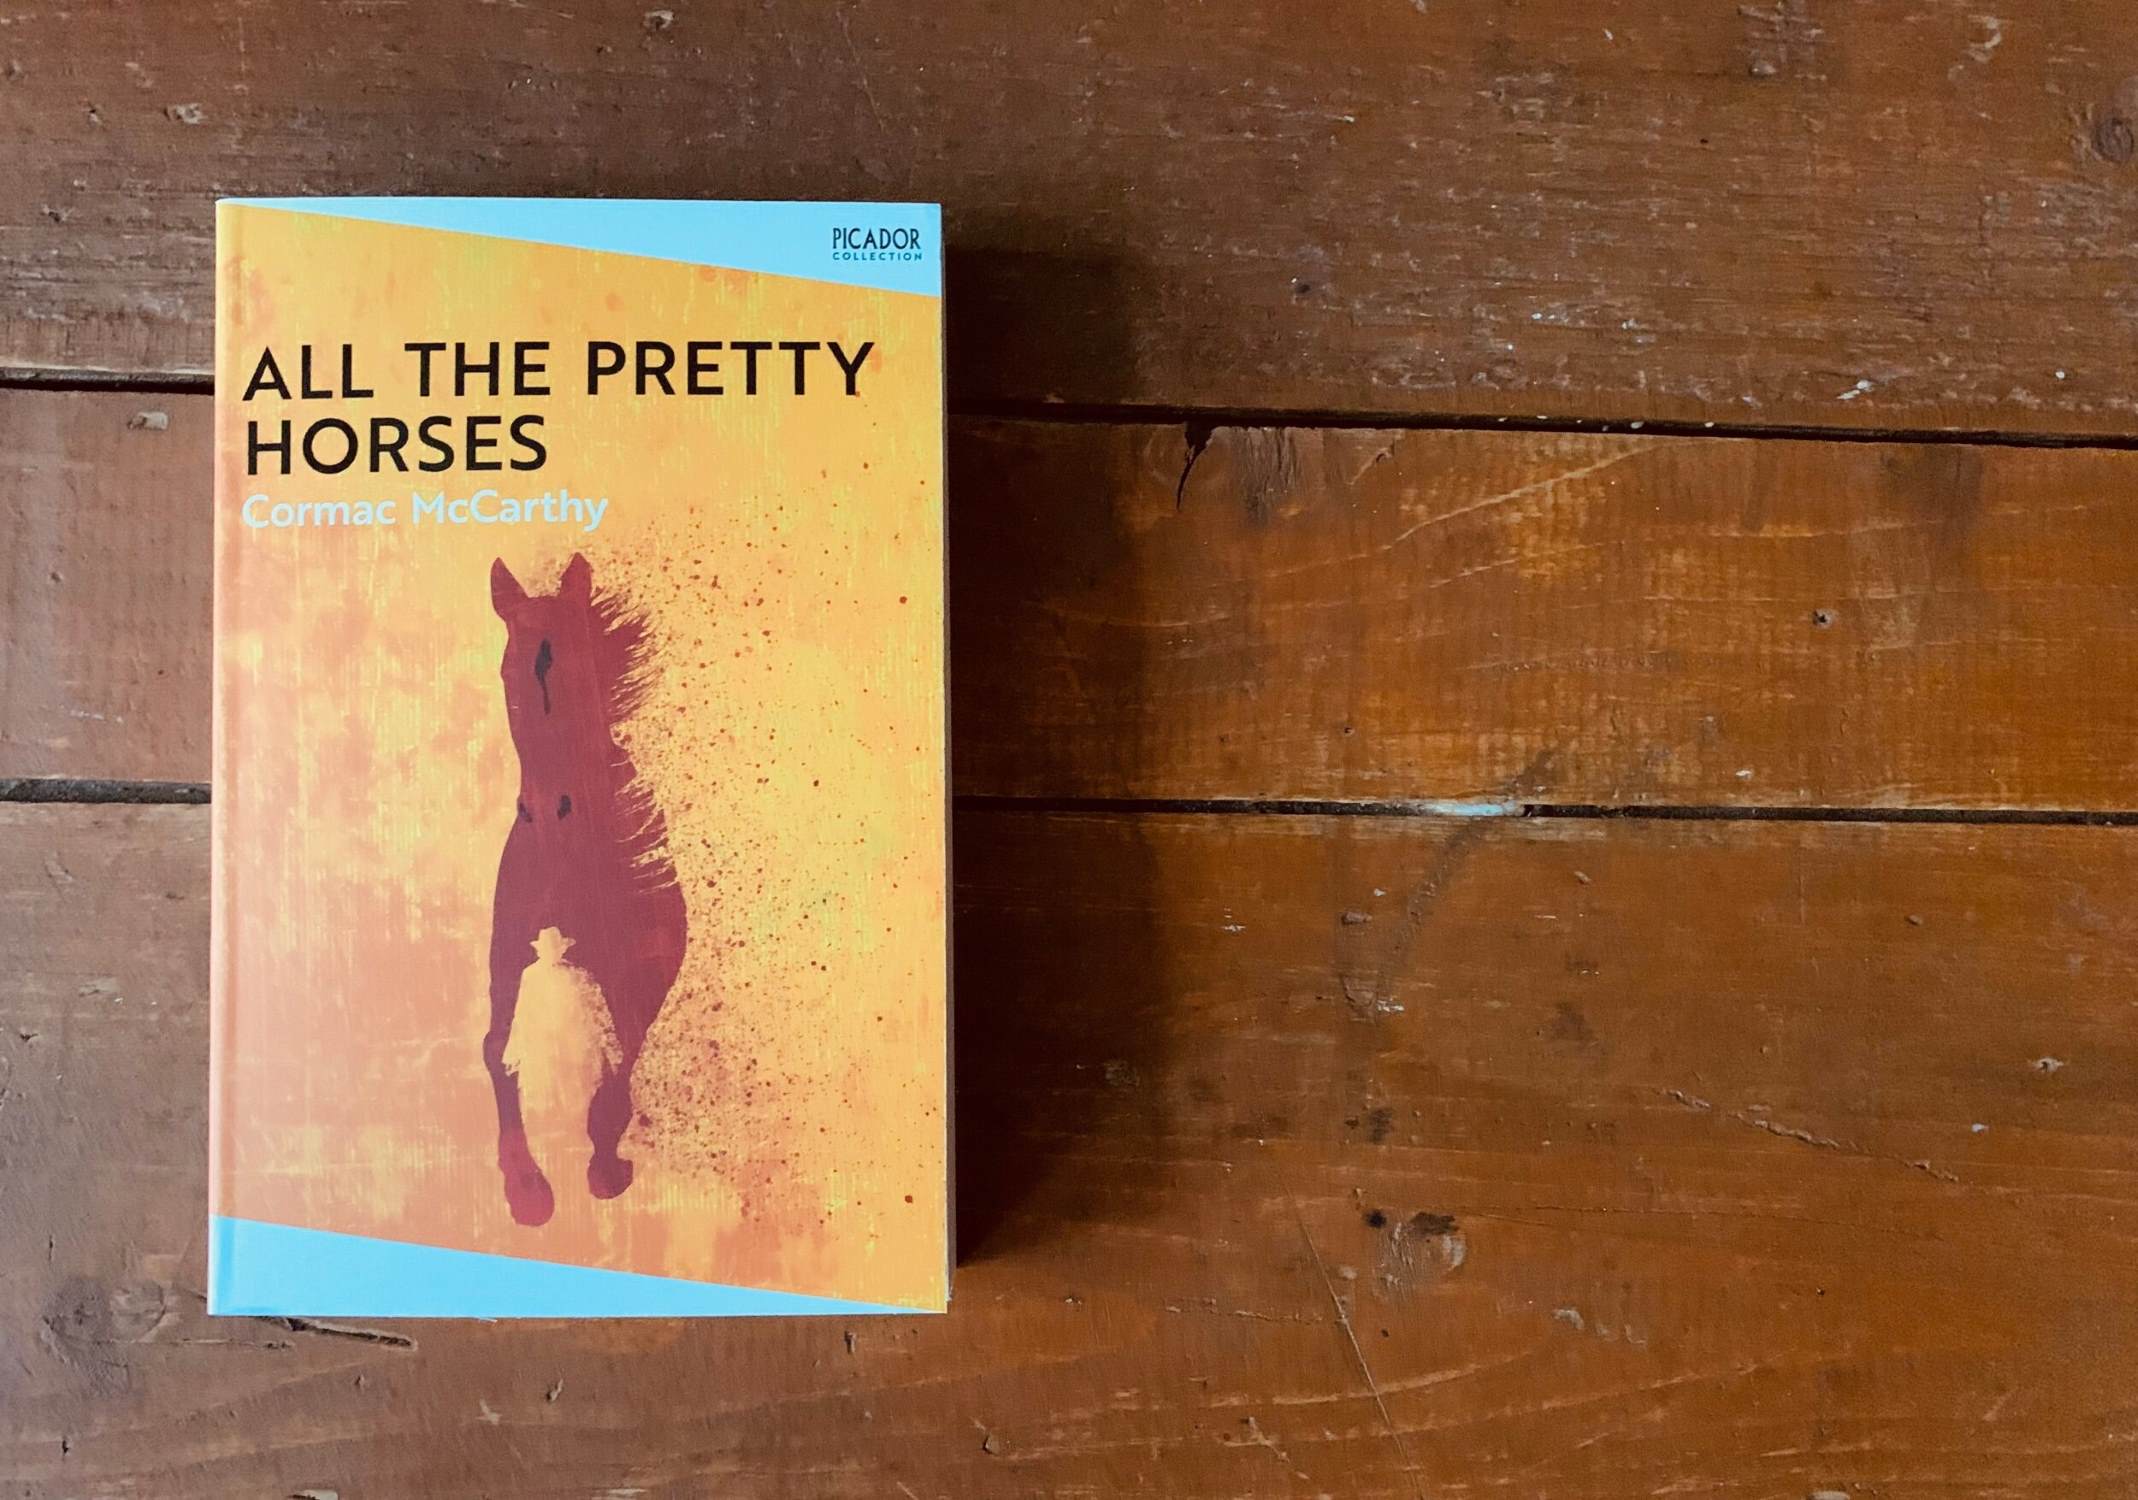 11-unbelievable-facts-about-all-the-pretty-horses-cormac-mccarthy